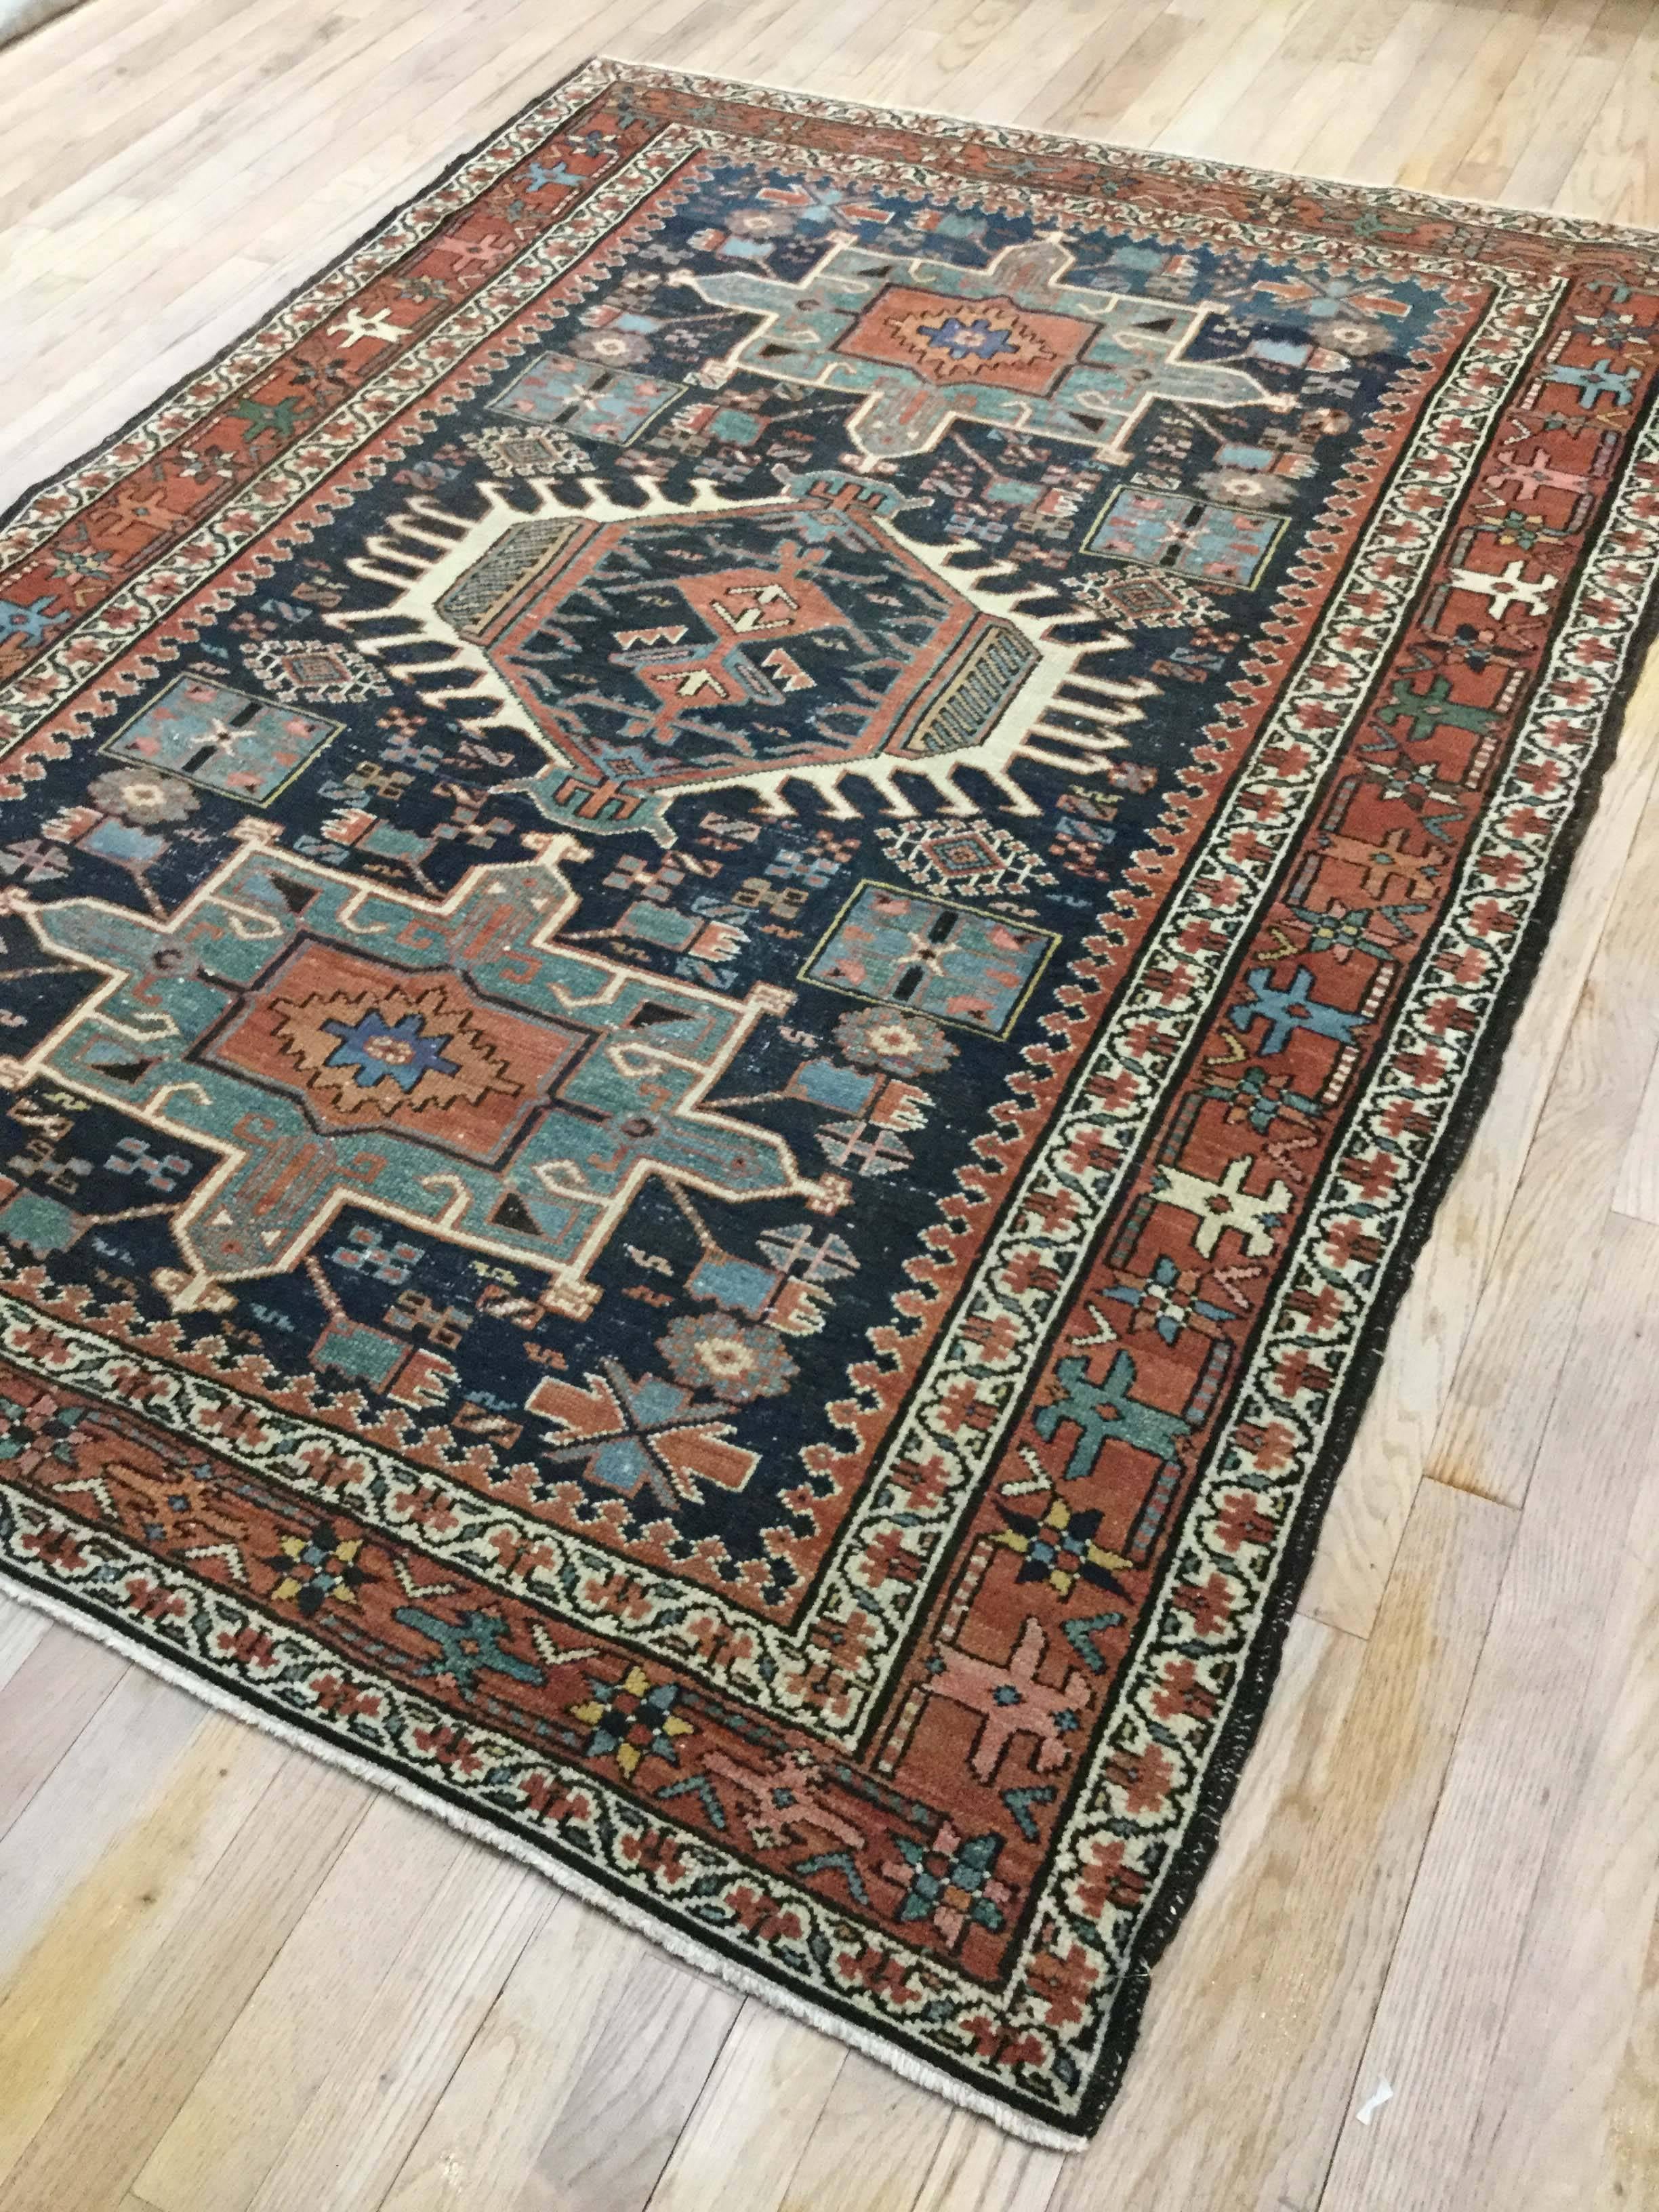 Hand-Woven Karaja Rug, First Quarter of the 20th Century